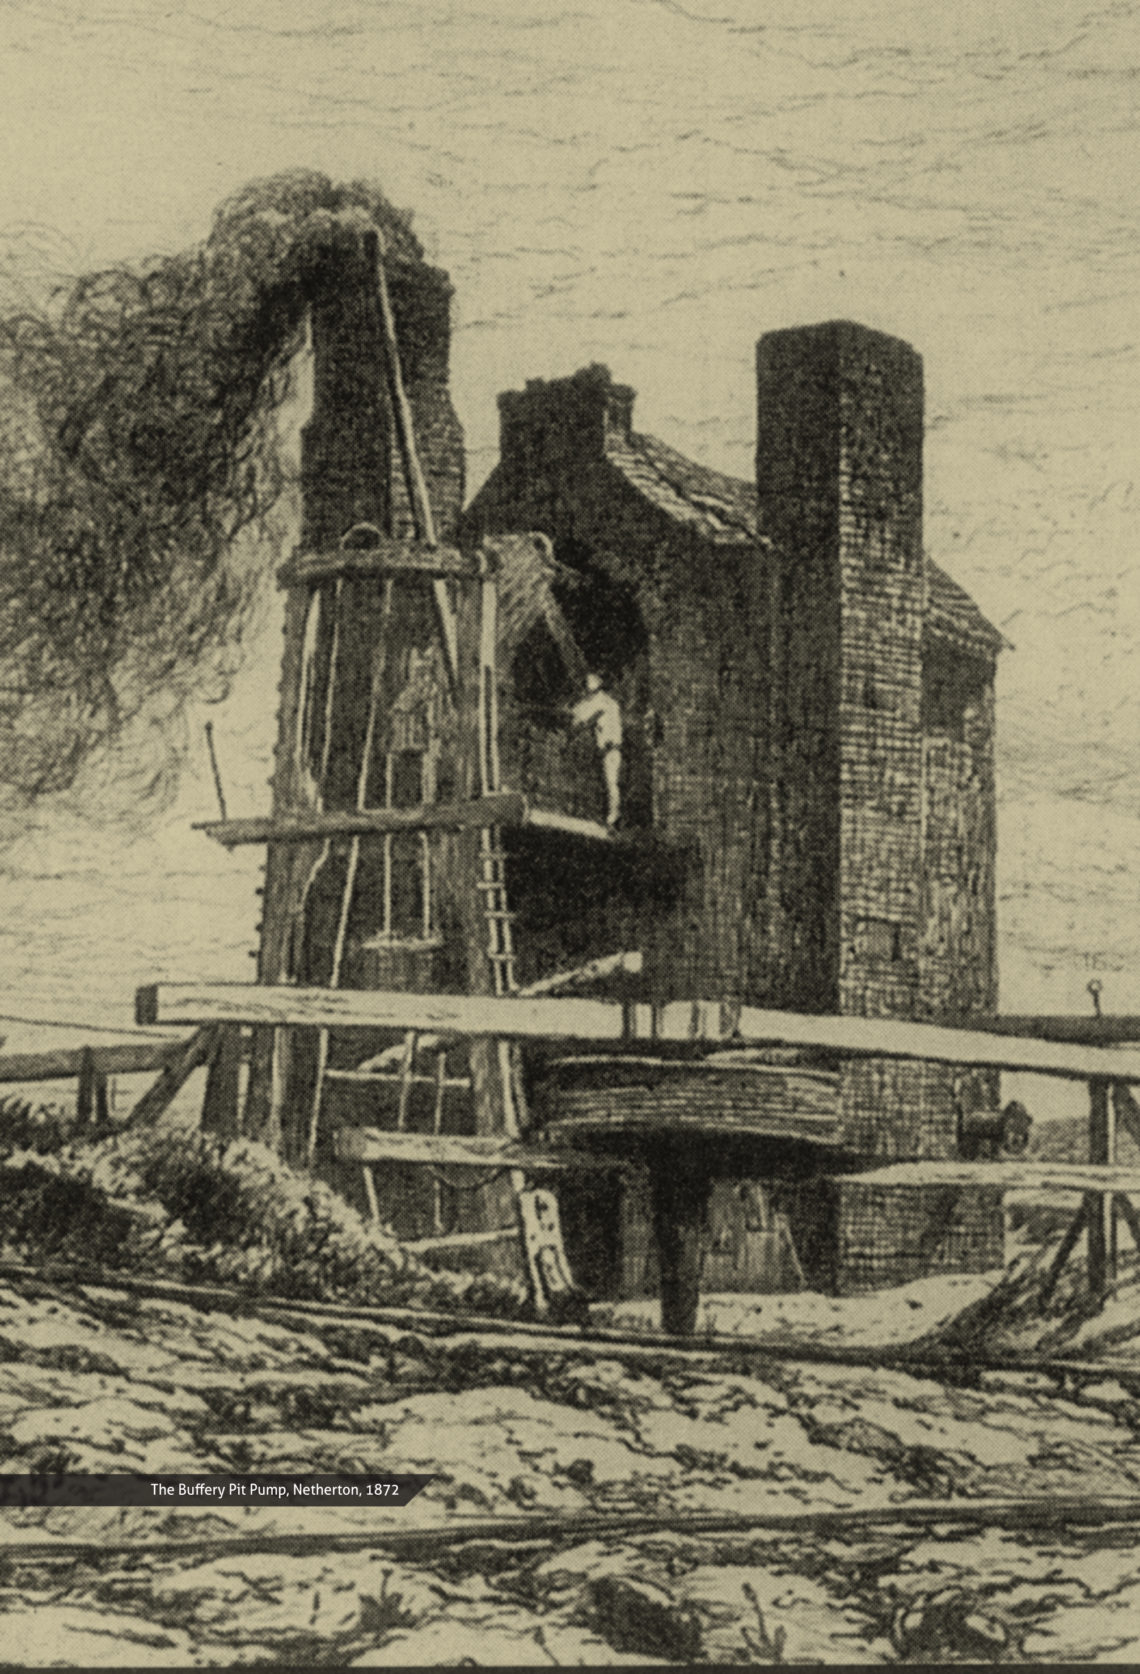 Image of the old Bufferty pumping engine in the West Midlands from 1872 (contemporary sketch)